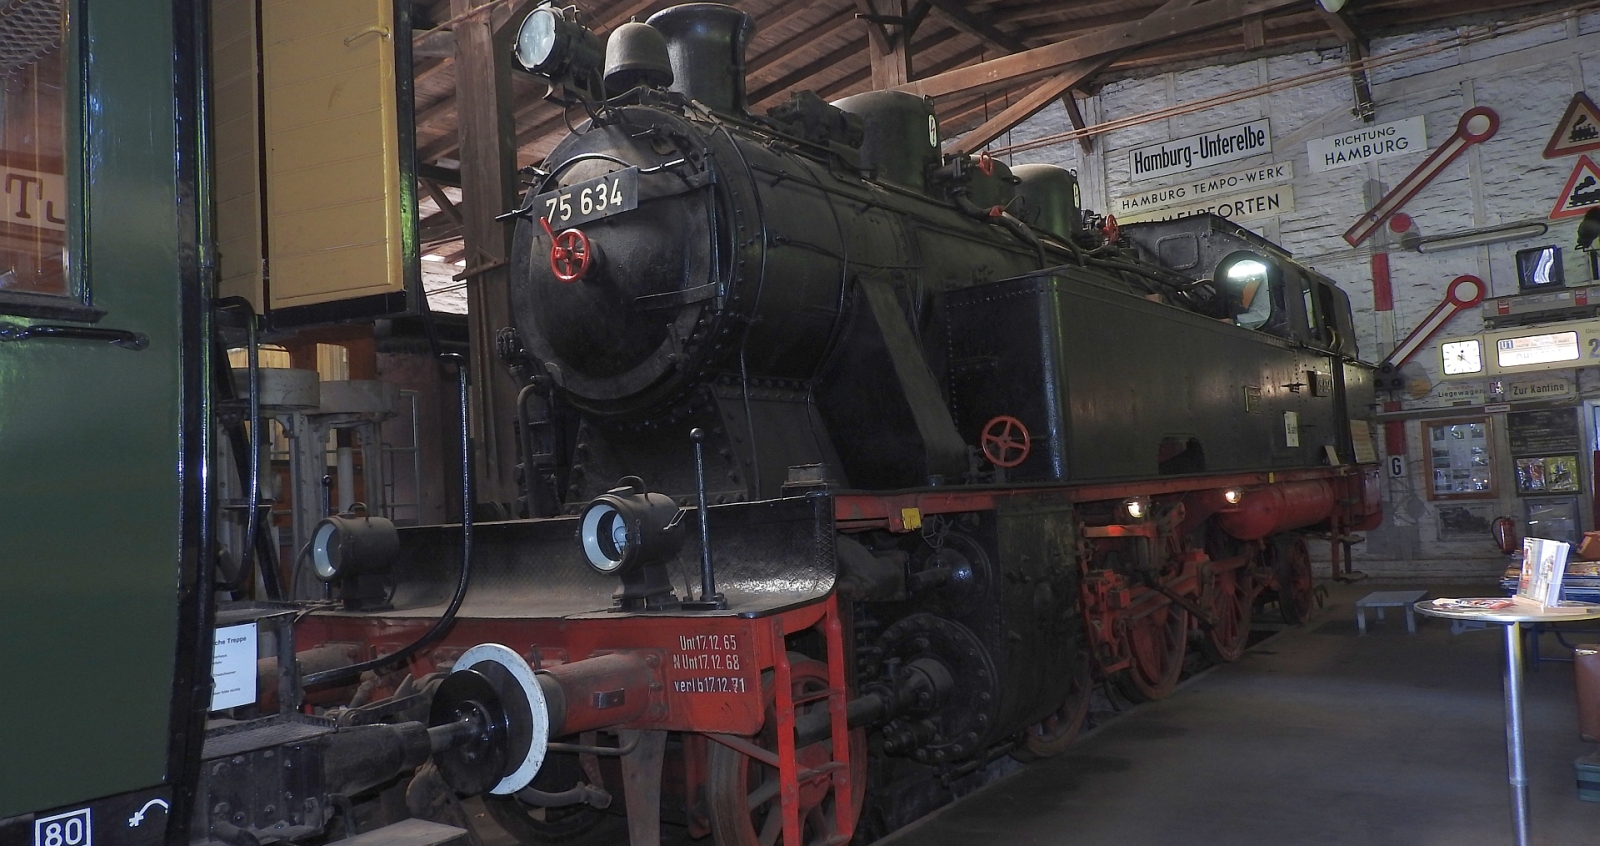 Former ELE 14 and 75 634 of the Reichsbahn in the Aumühle engine shed of the Verein Verkehrsamateure und Museumsbahn